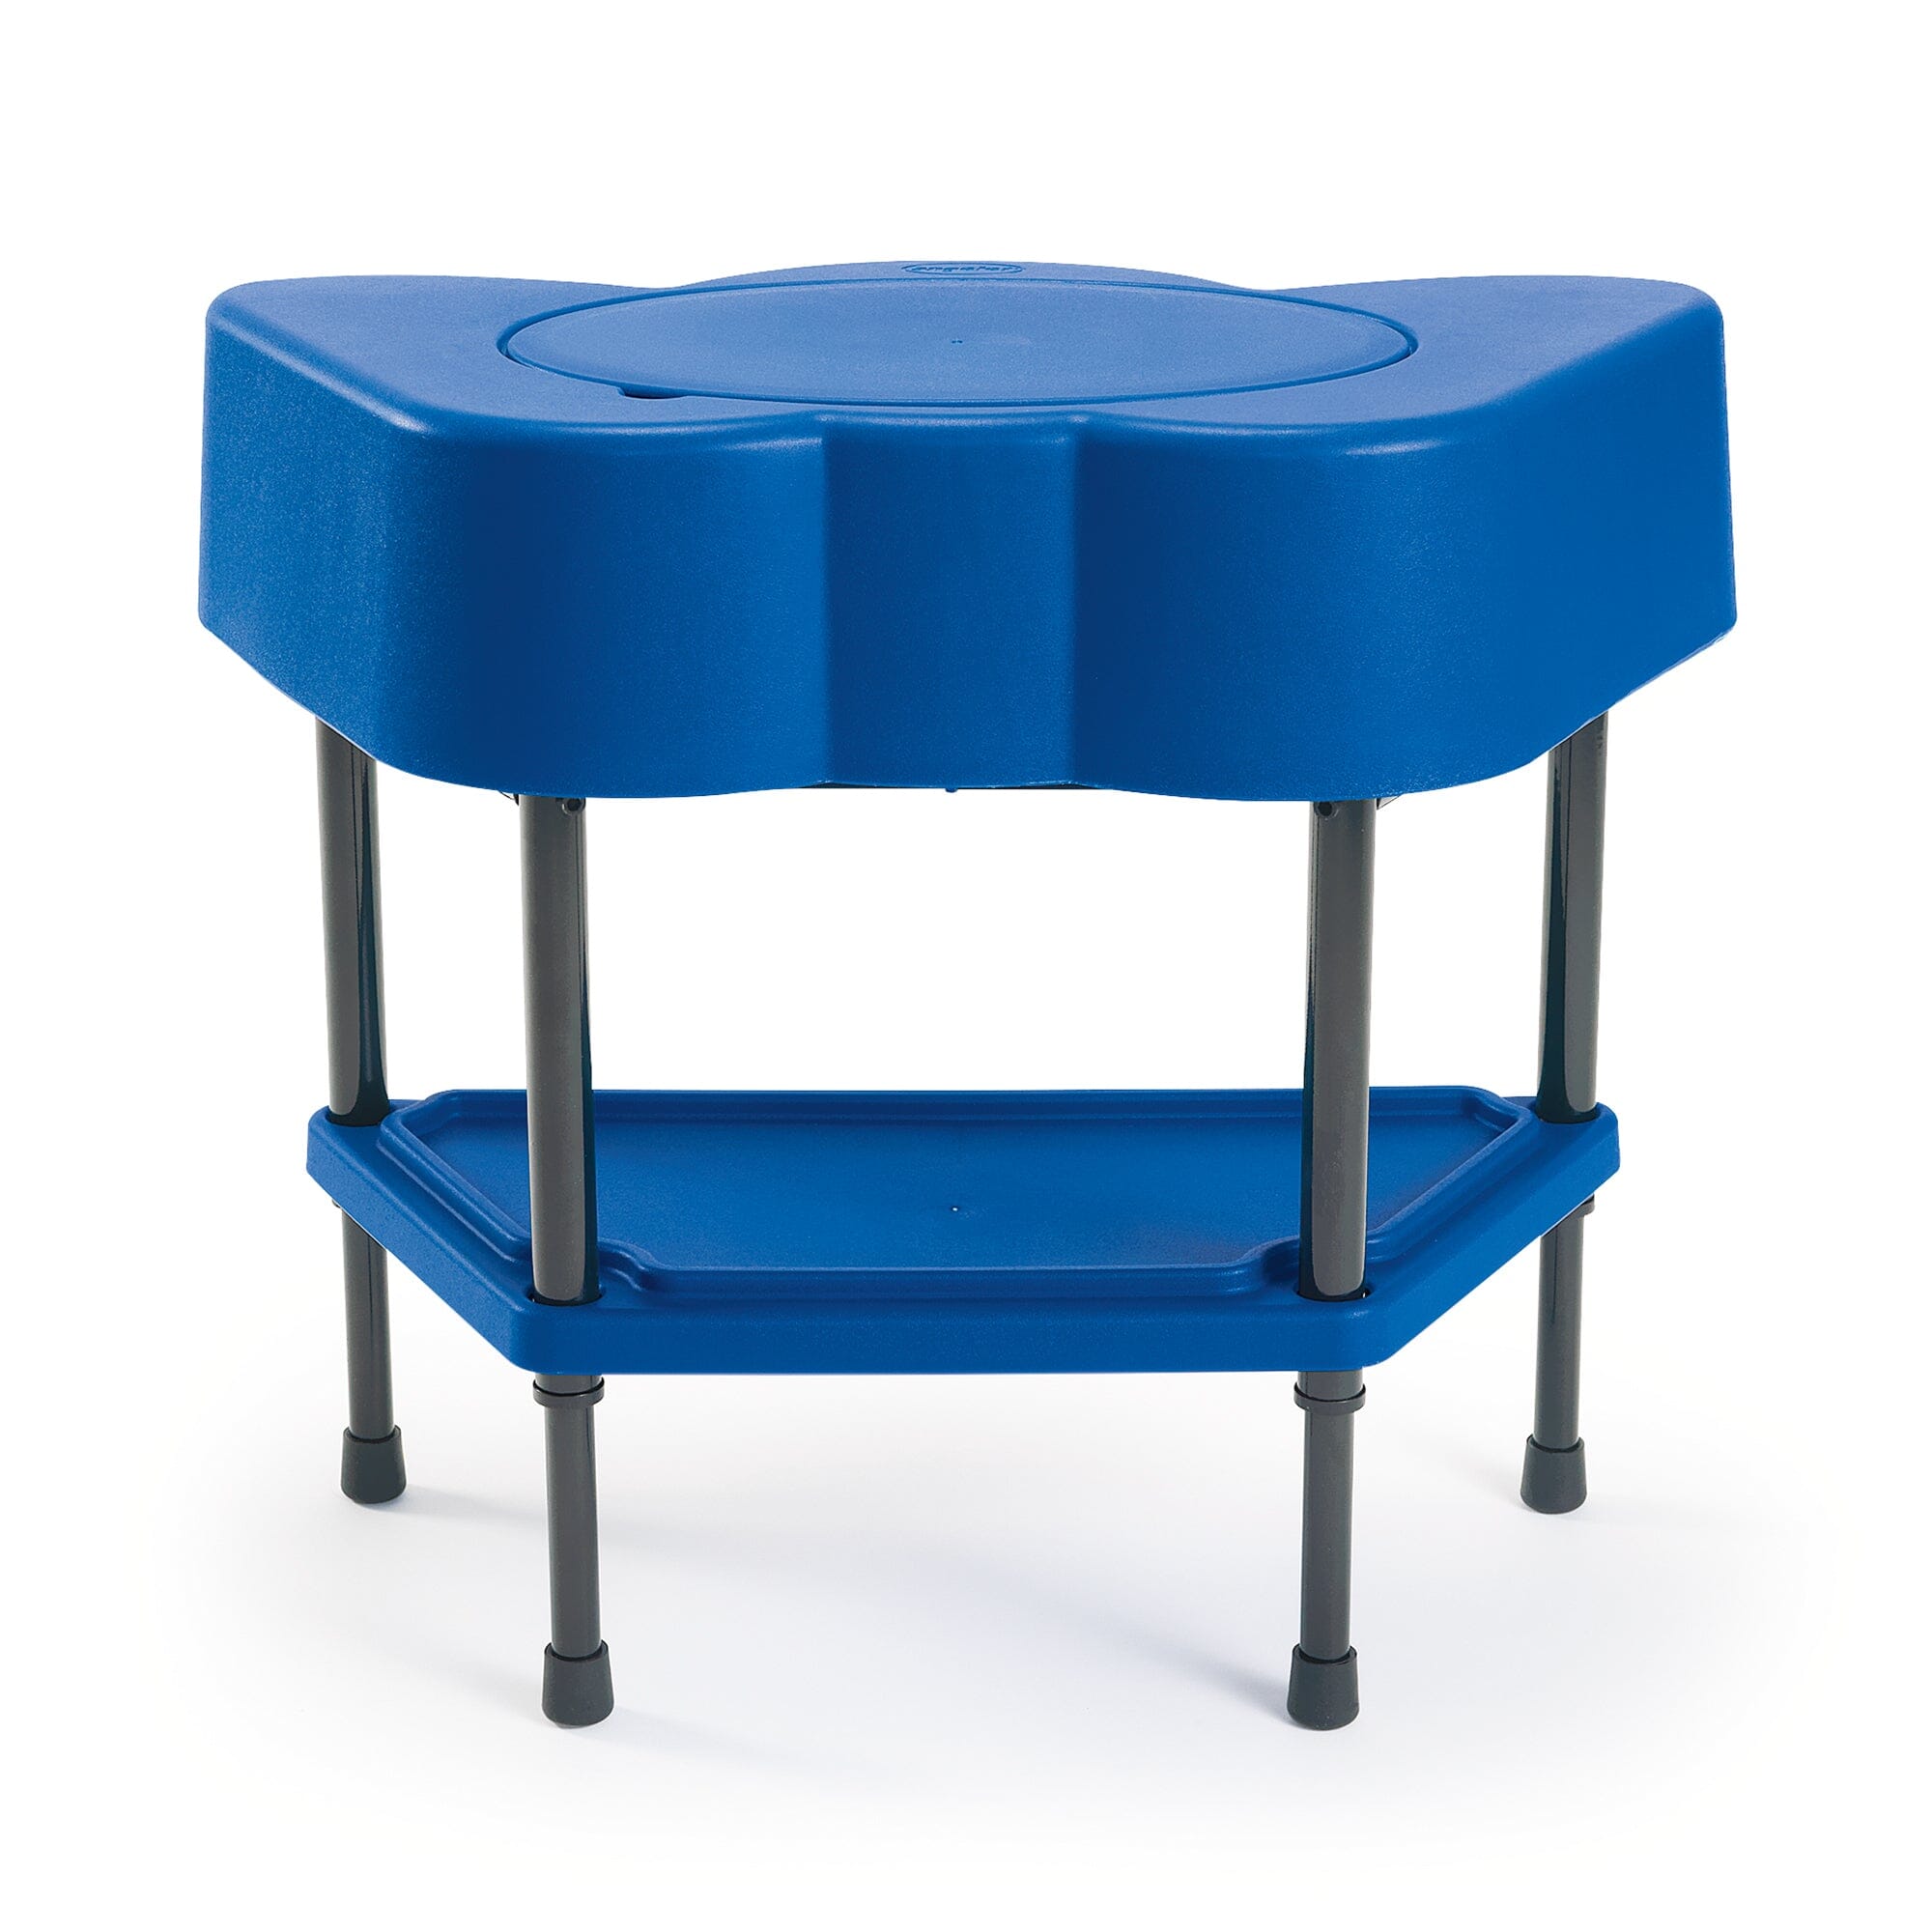 AS IS - Sensory Table Furnishings Louise Kool & Galt Blue for child care day care primary classrooms